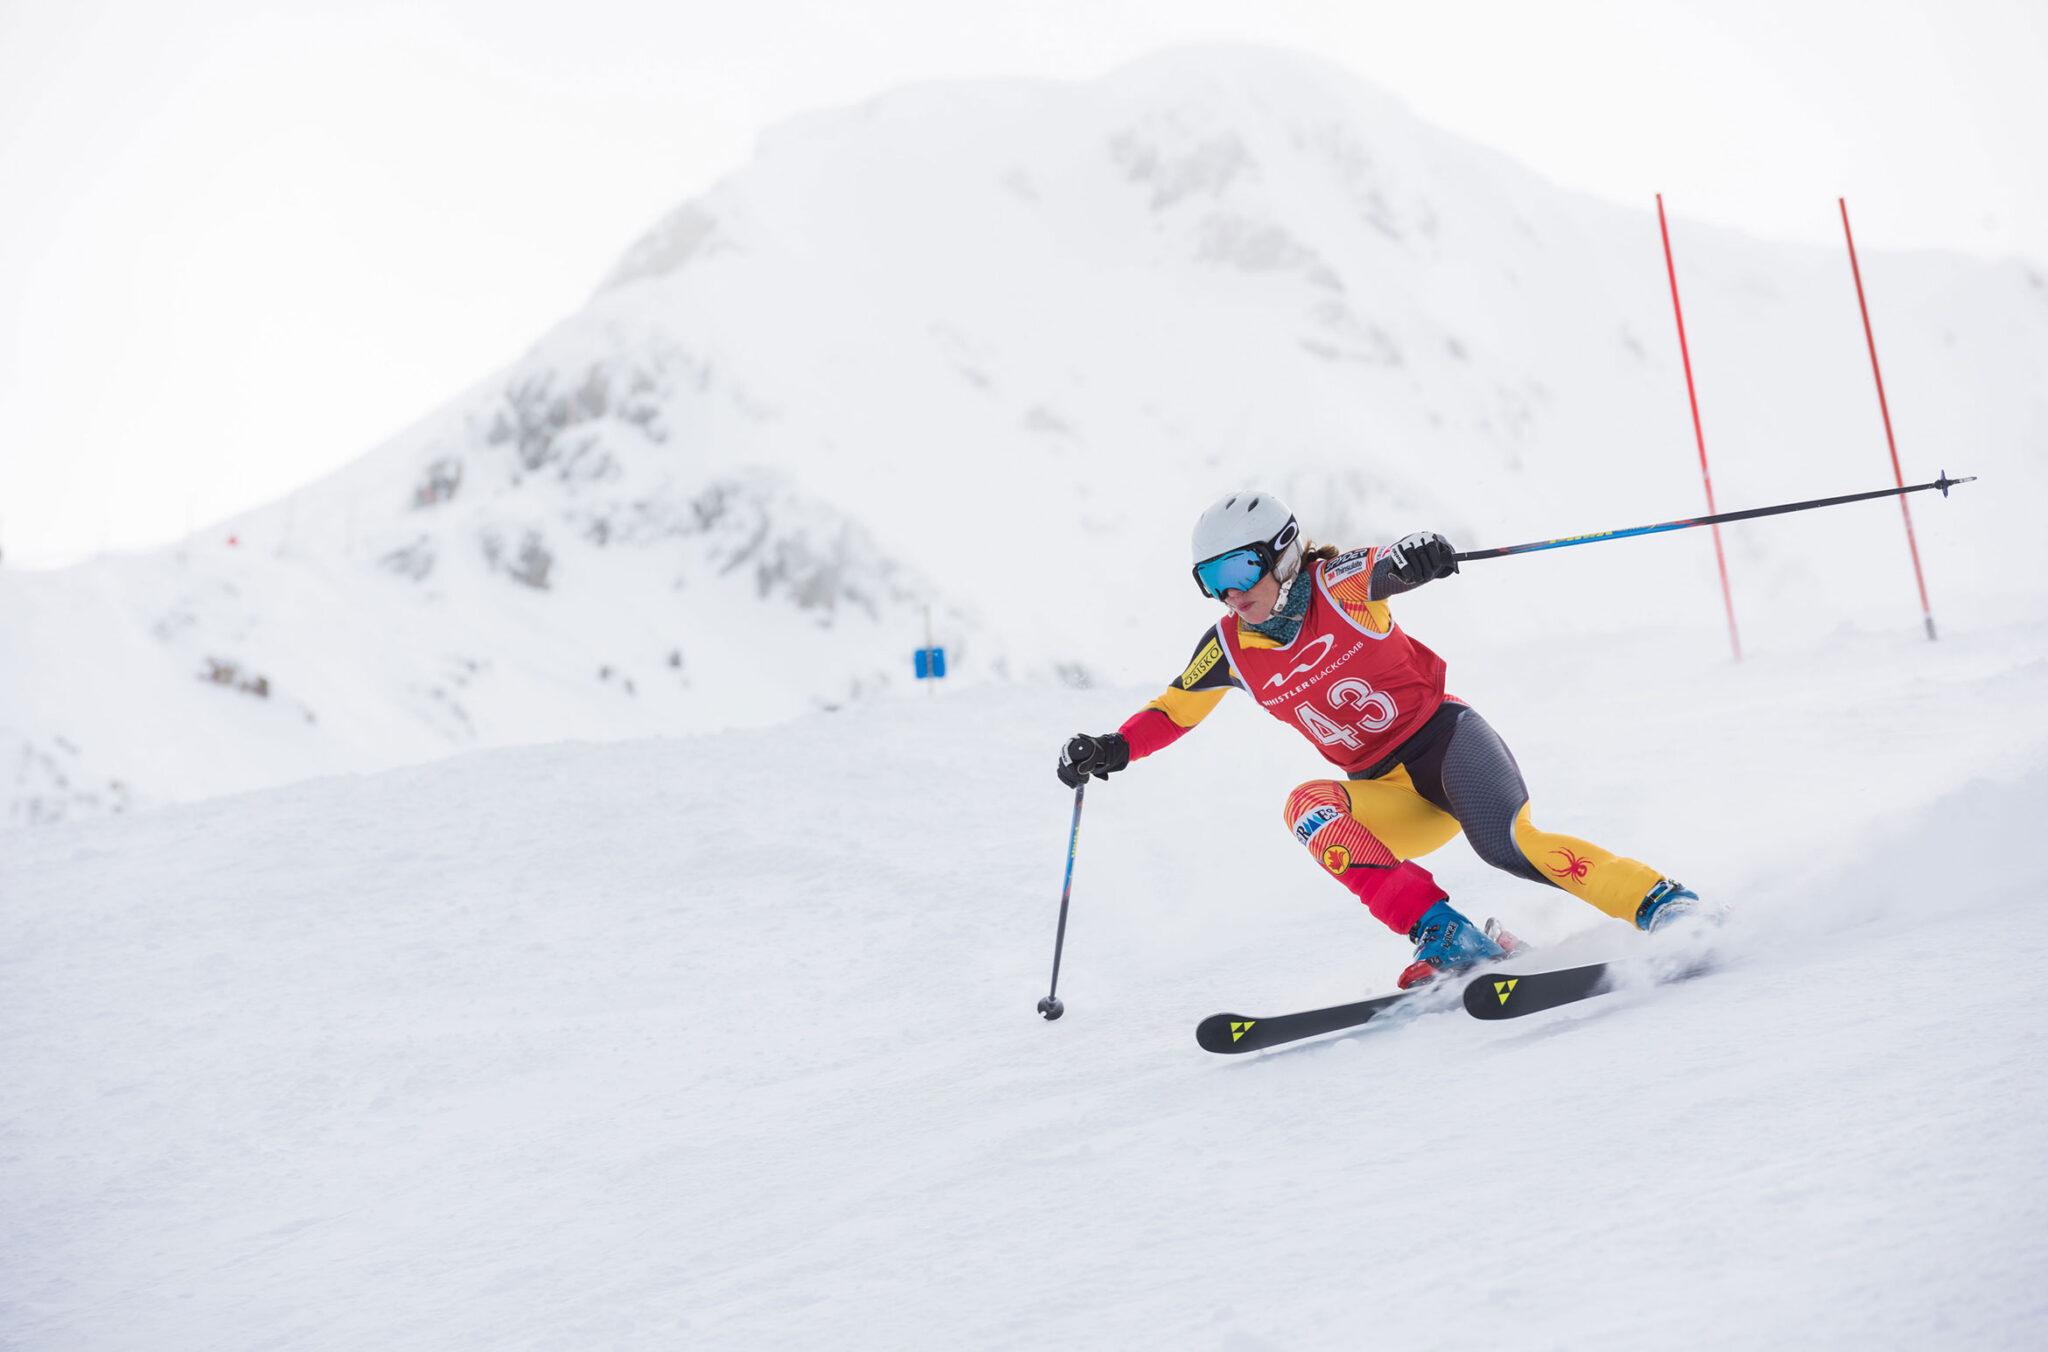 A ski racers tackles a gate in the Peak to Valley Race, the longest giant slalom race in the world, which happens on Whistler Mountain.